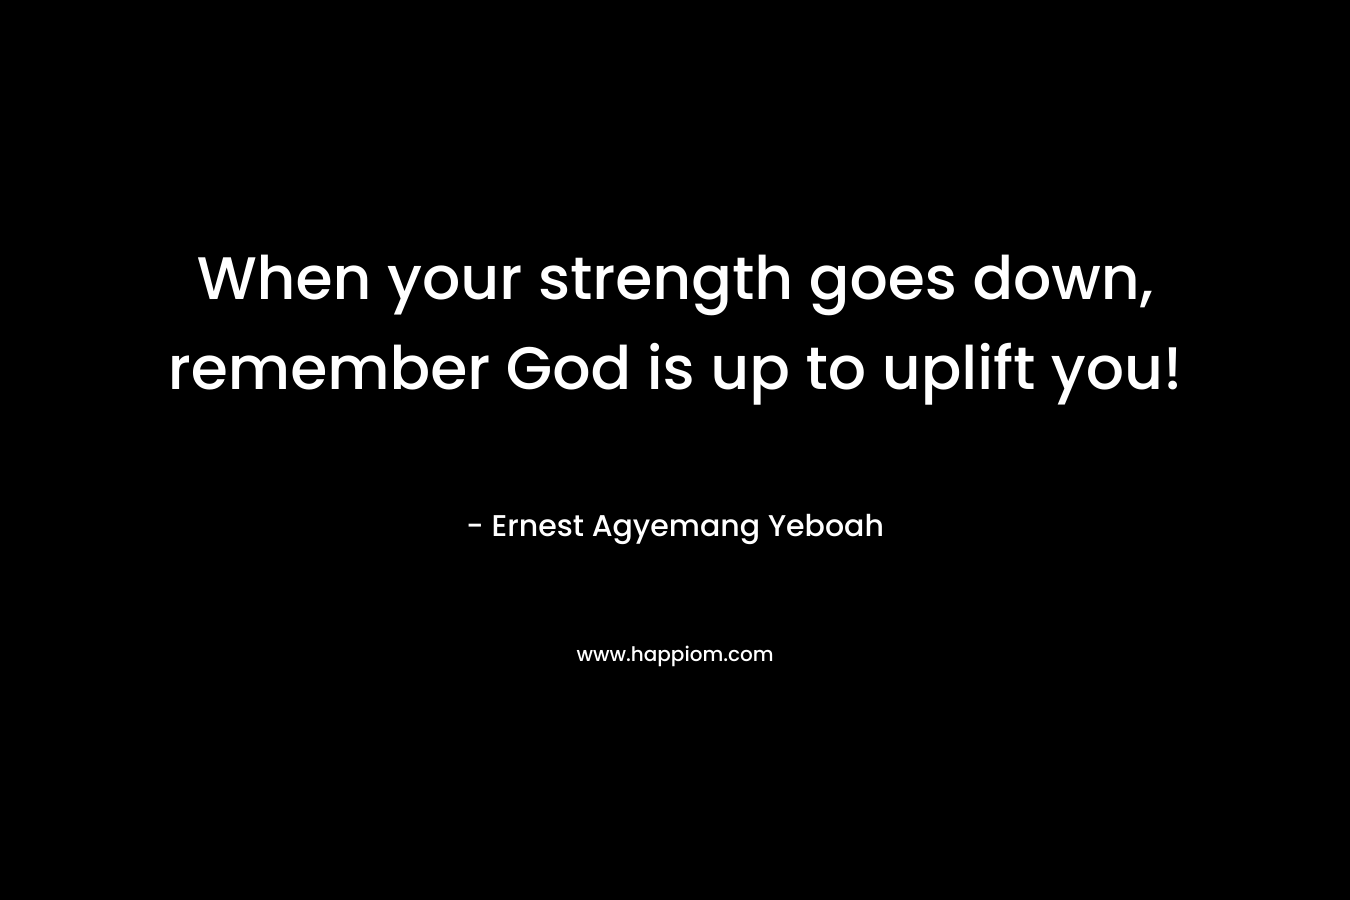 When your strength goes down, remember God is up to uplift you!